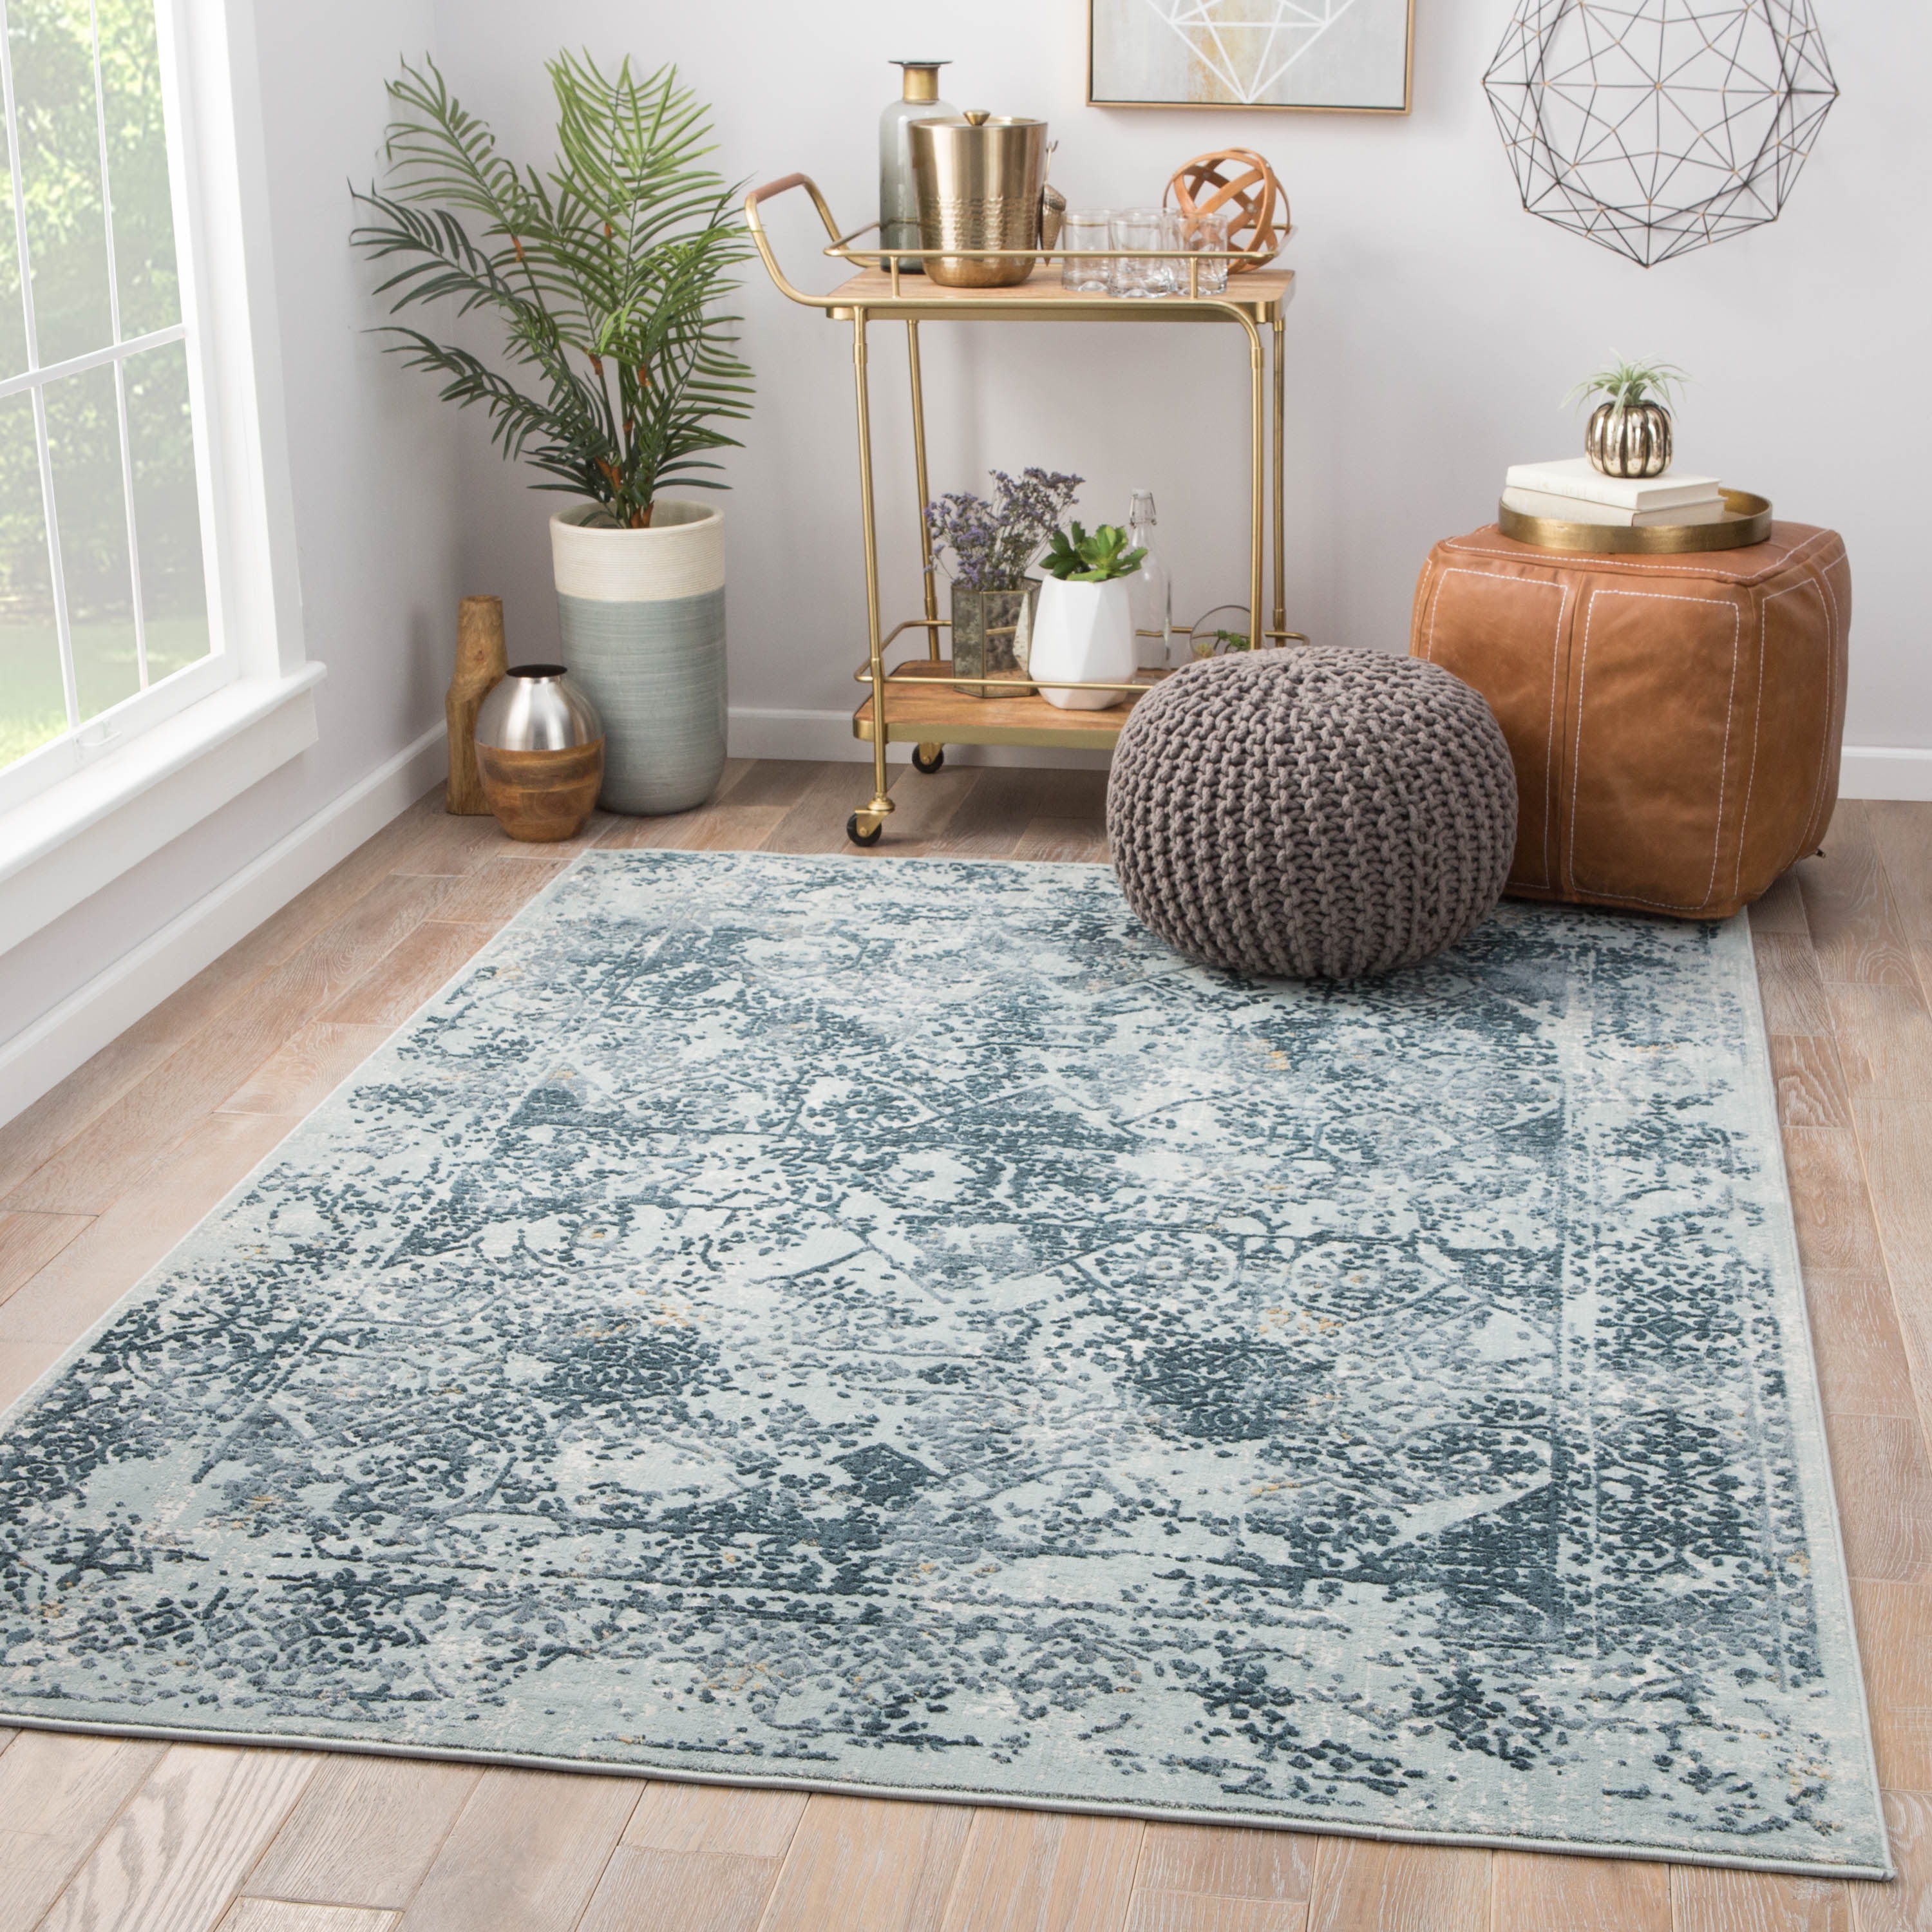 Yvie Abstract Blue/ Teal Area Rug (5' X 7'6") - Image 4